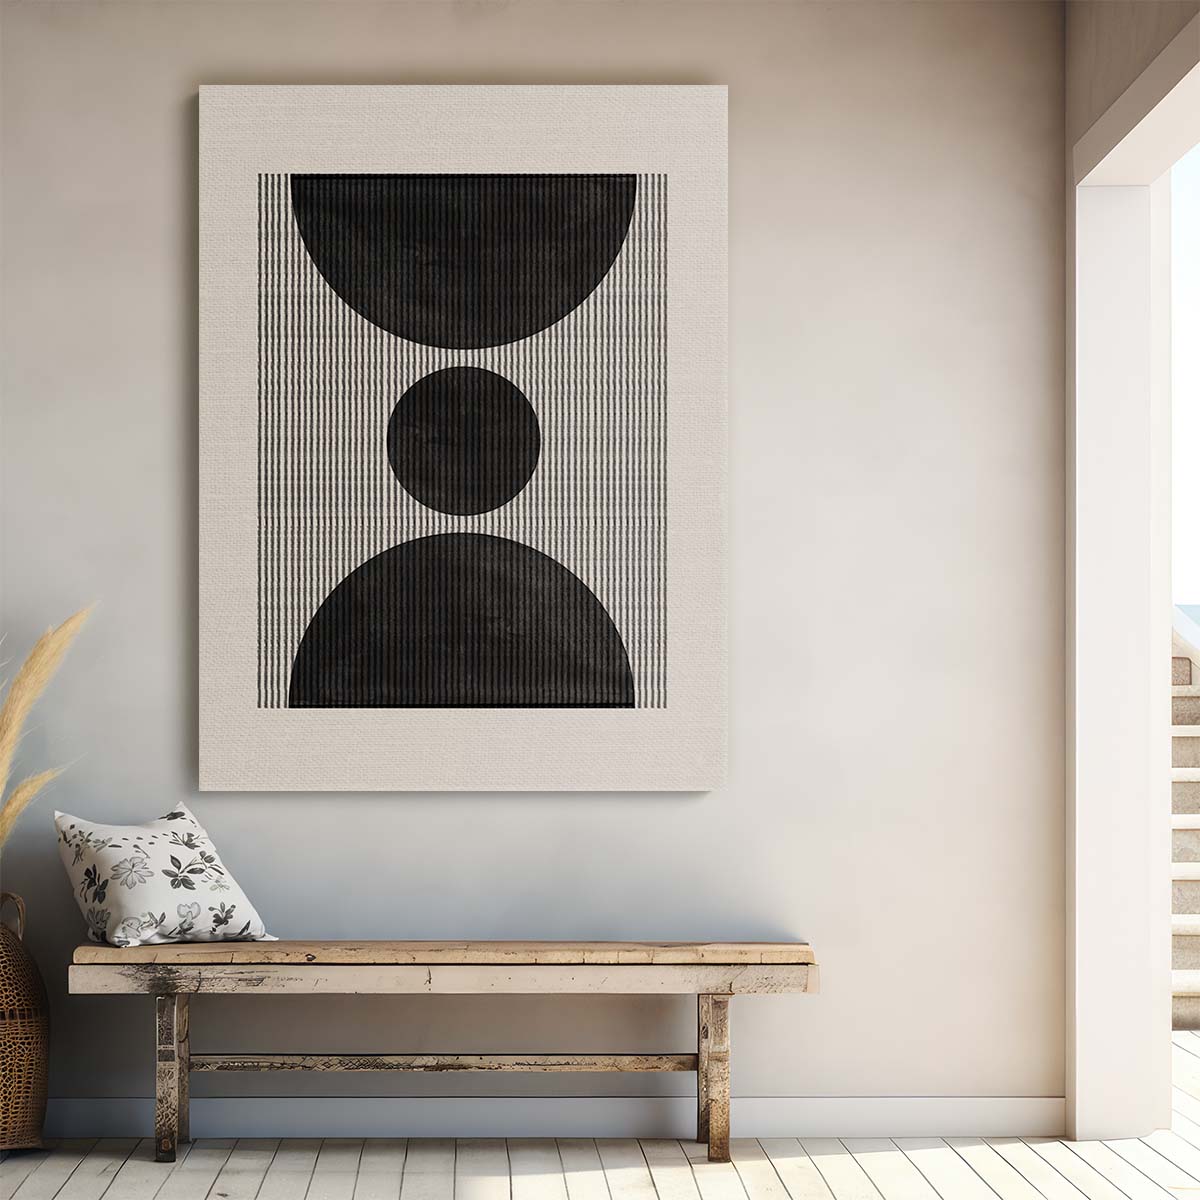 Mid-Century Beige Geometric Illustration Art with Abstract Shapes by Luxuriance Designs, made in USA